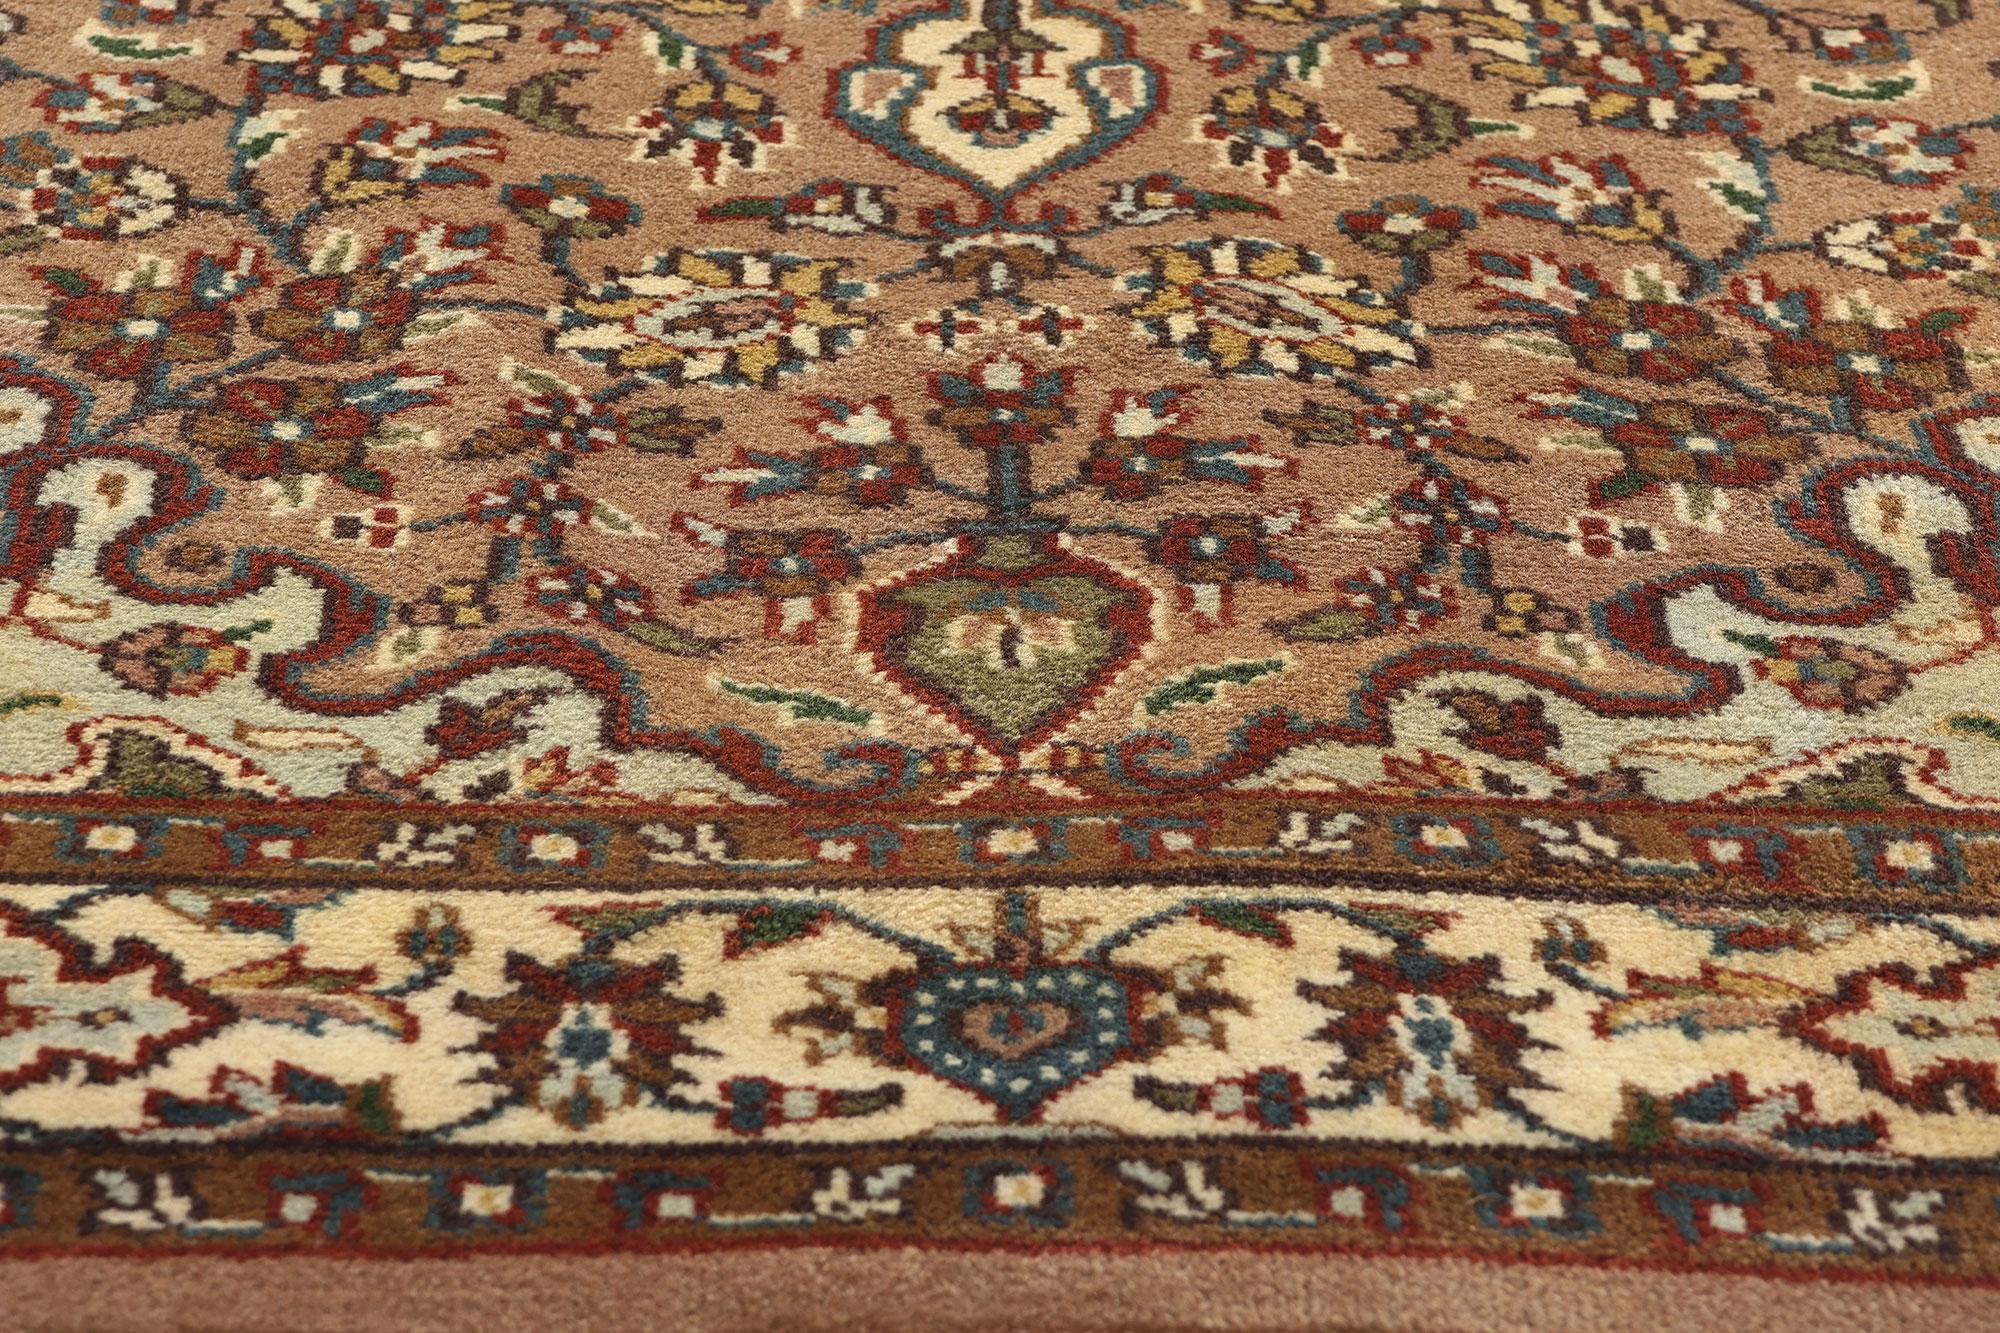 Earth-Tone Vintage Indian Isfahan Rug In Good Condition For Sale In Dallas, TX